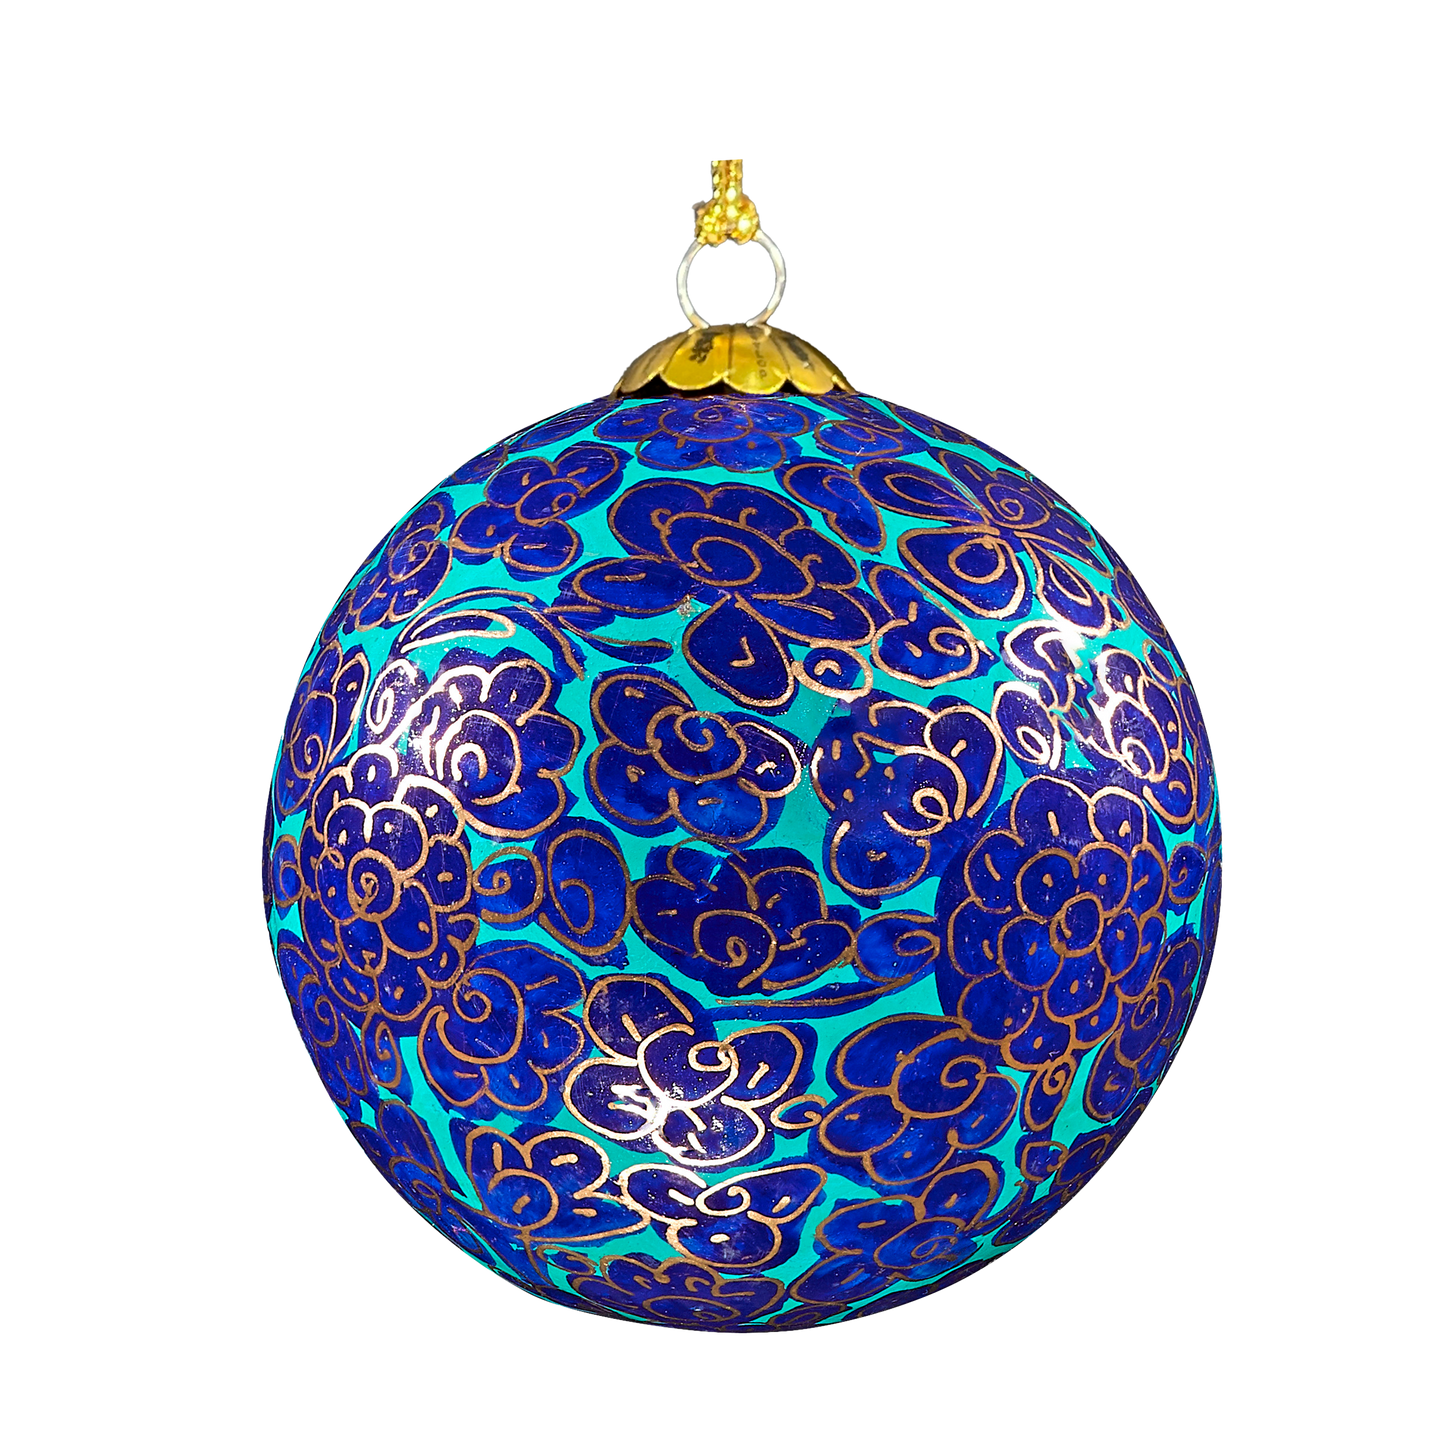 Enchanted Royal Blue Christmas Bauble for Christmas tree decorations